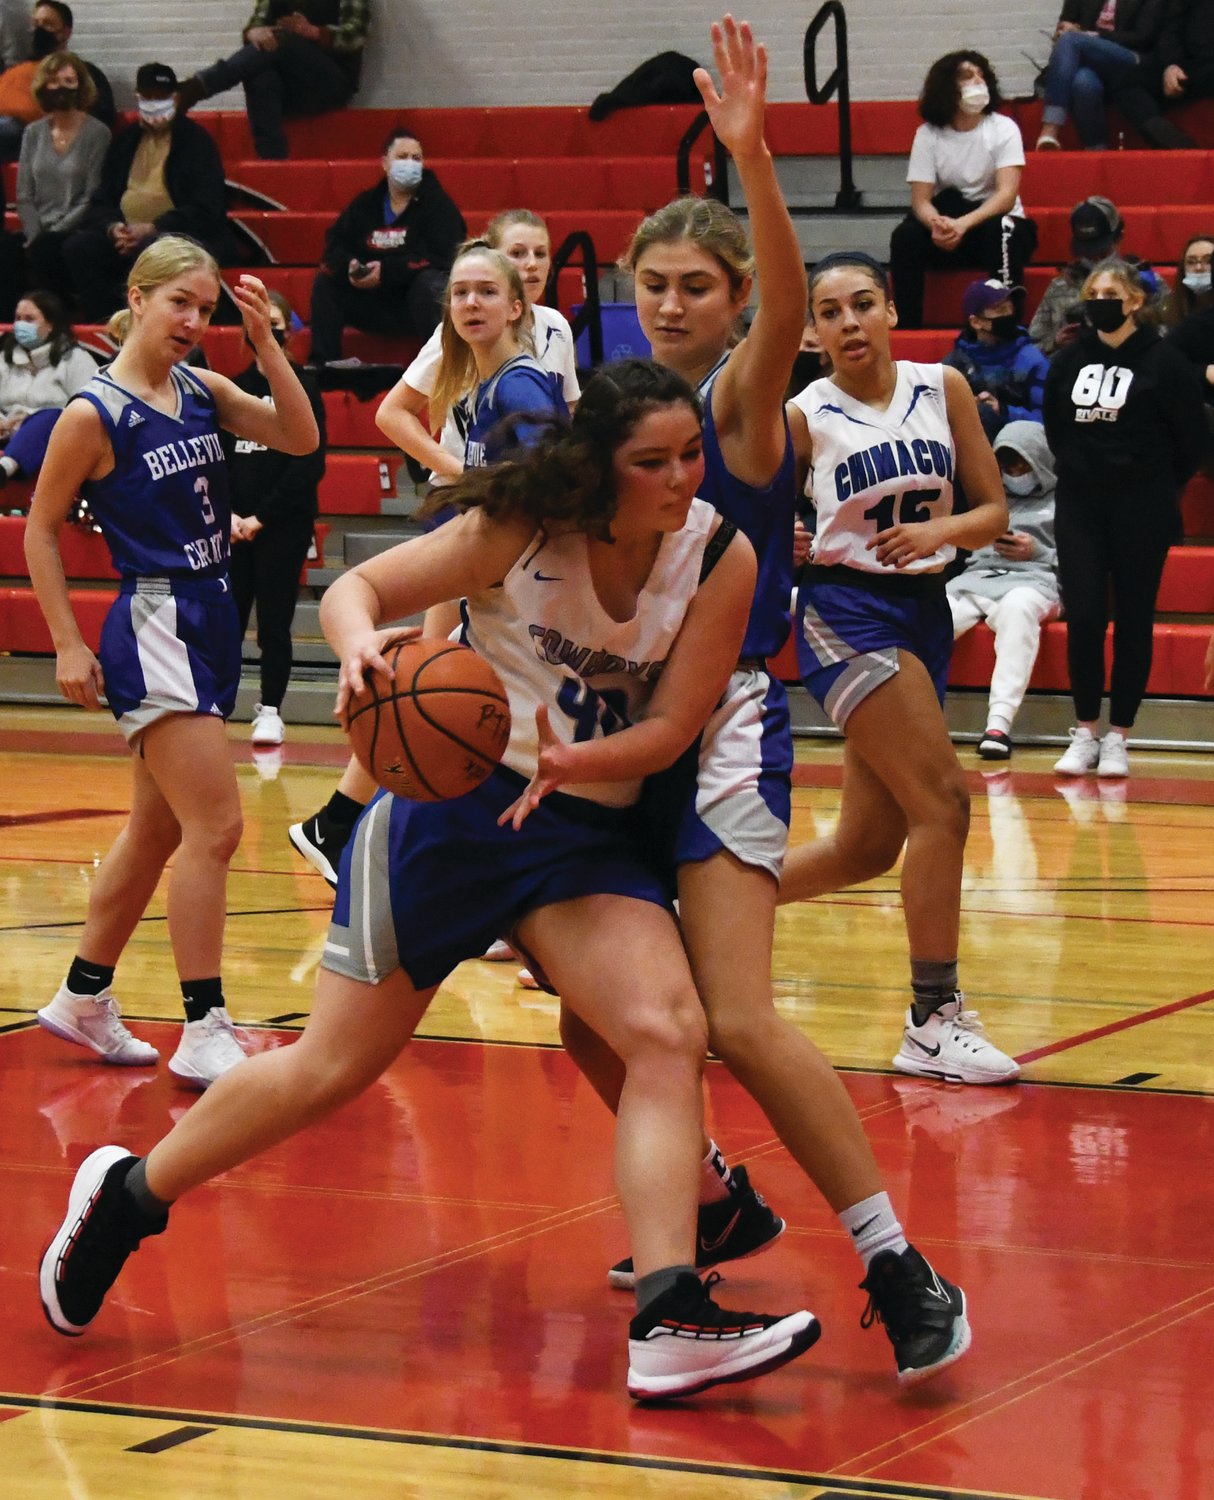 Alyssa Vandenberg cuts into the paint to score a layup in the third period. The forward netted 13 points on the night.